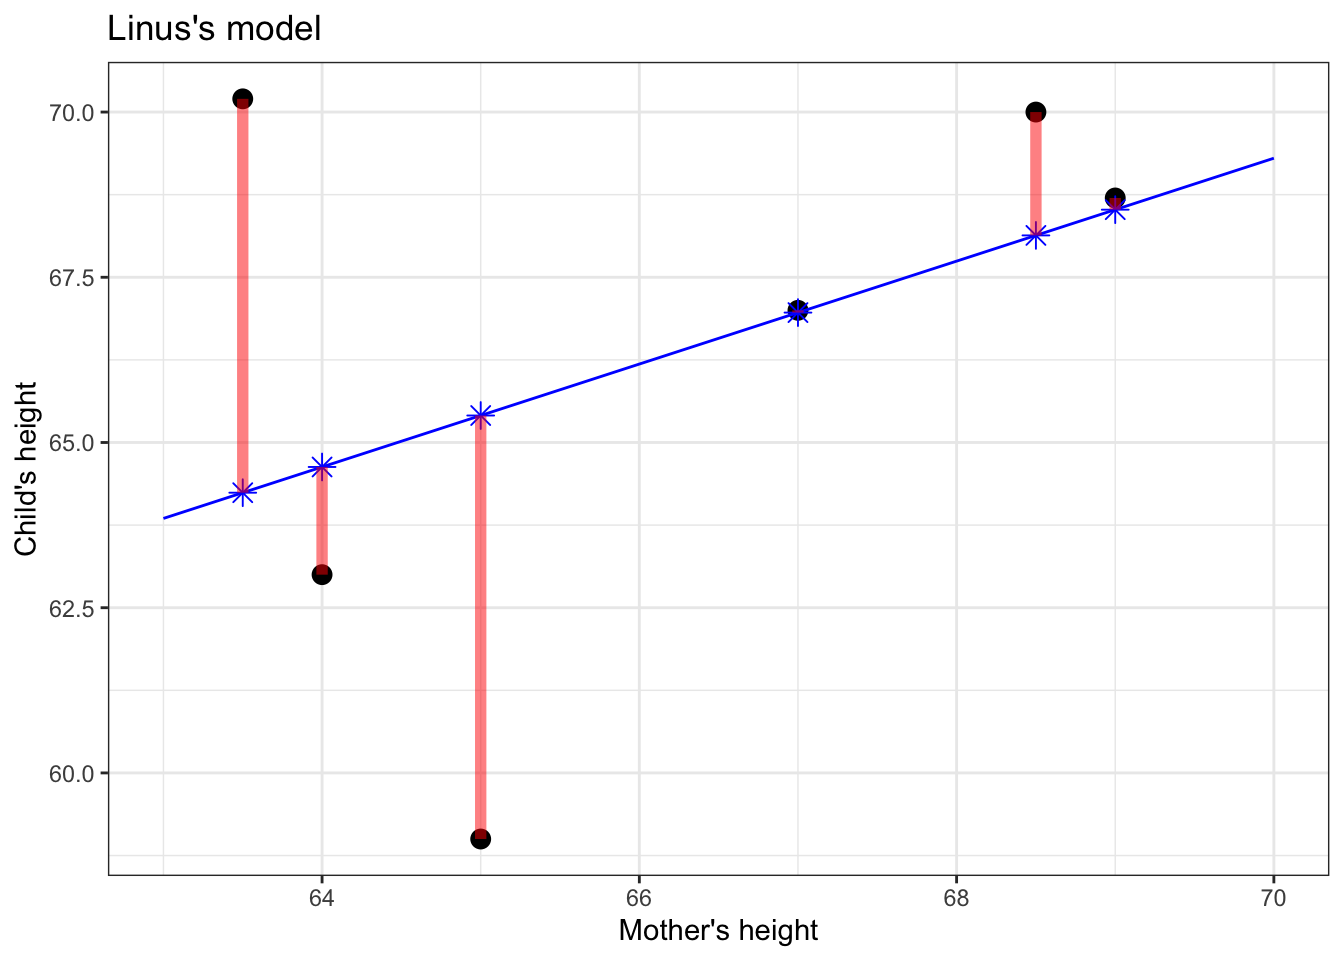 Figure 5.3: The model error for each data point (shown as red line segments) is the distance between the response value (vertical position of black dot) and the corresponding model value (blue \(\star\)).